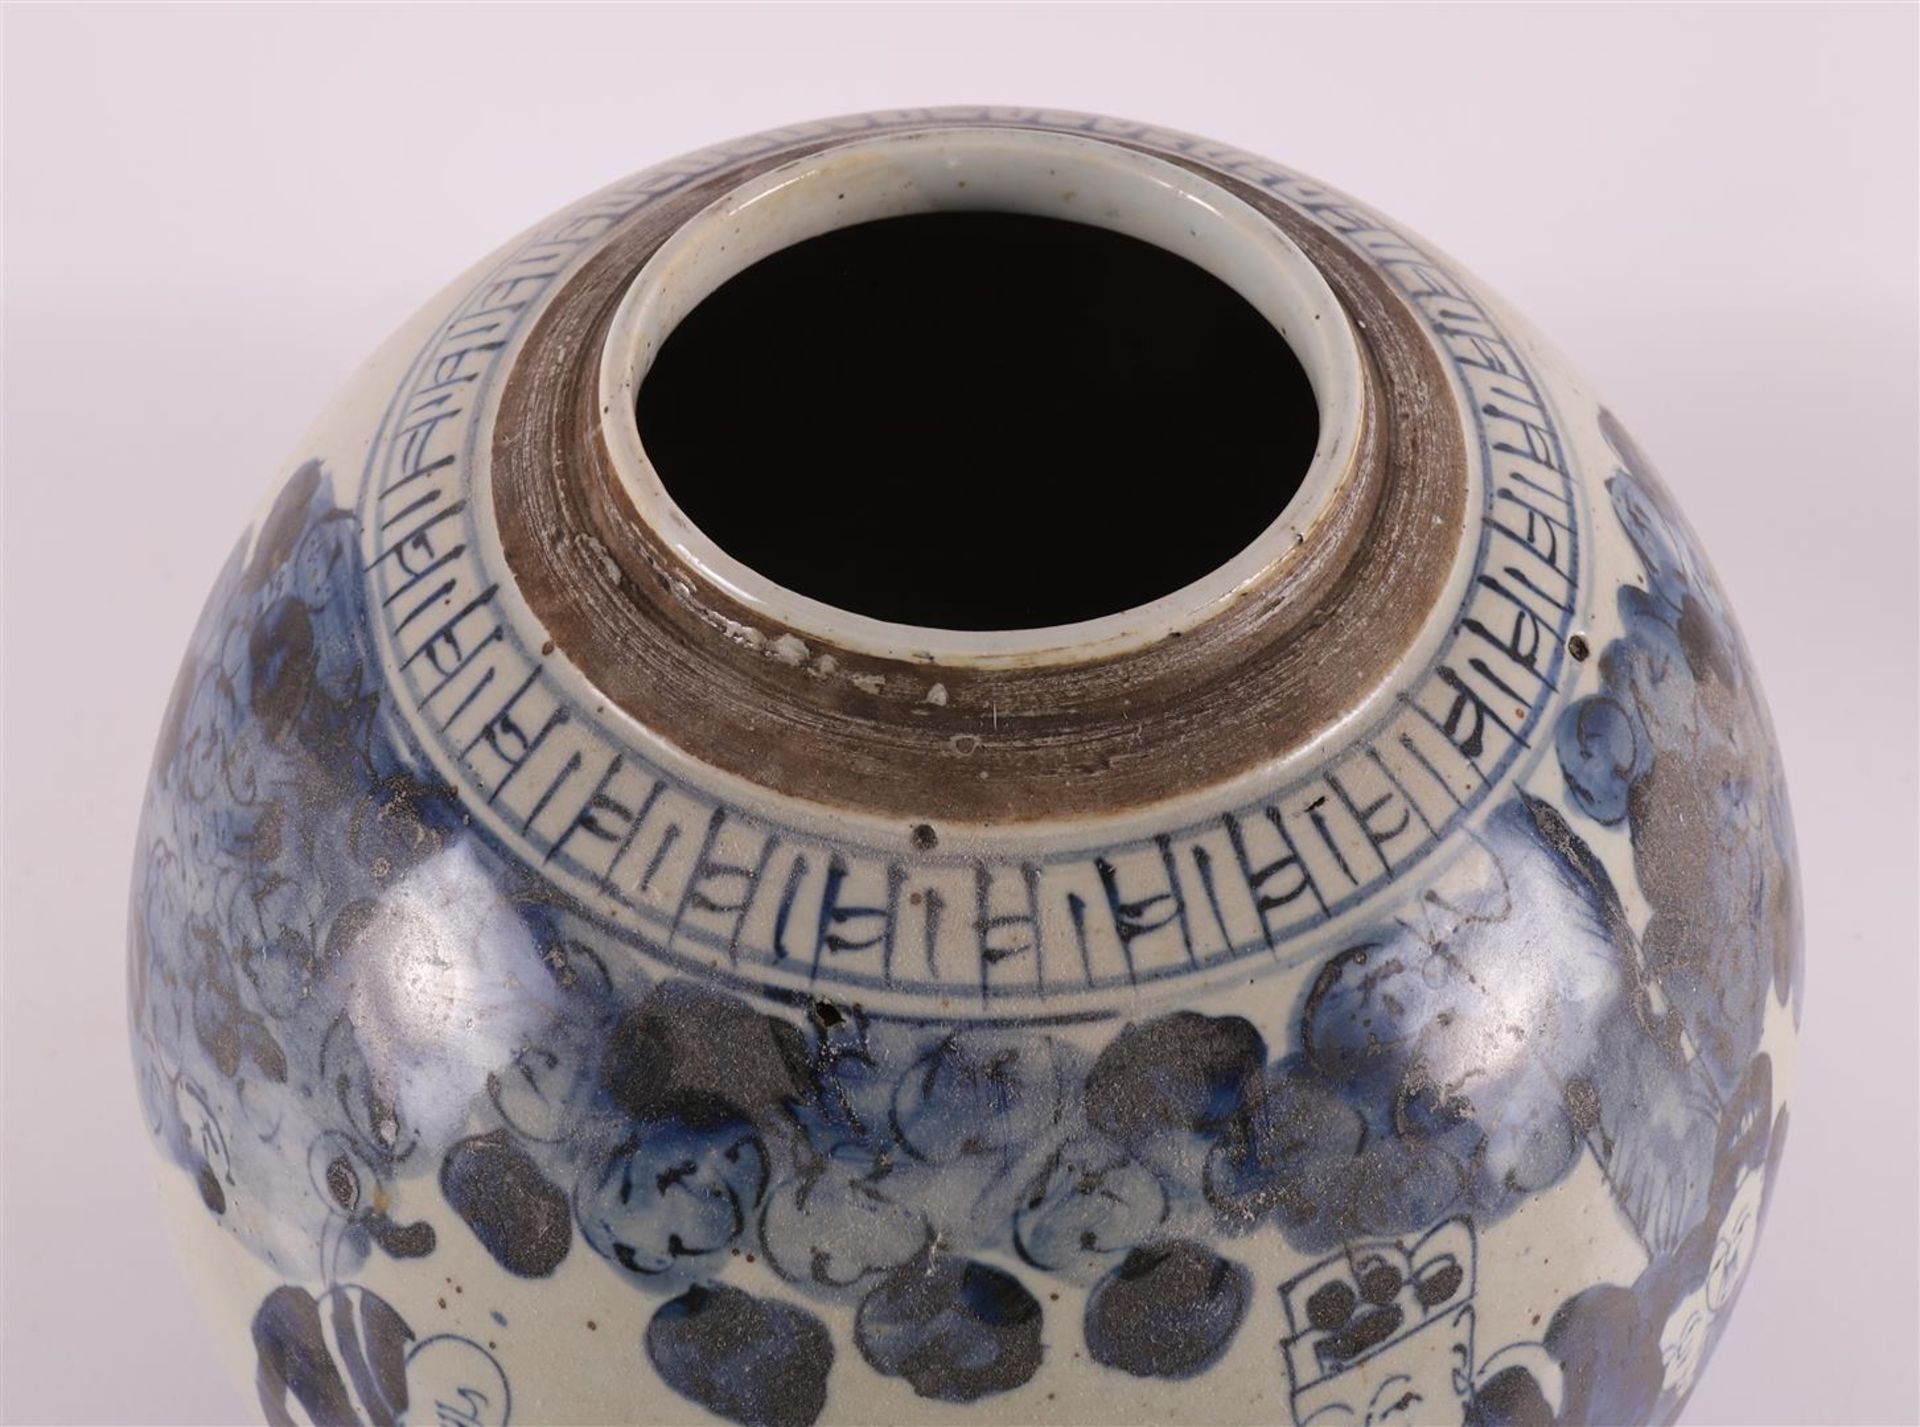 A blue/white porcelain ginger jar with lid, China, 19th century. - Image 7 of 12